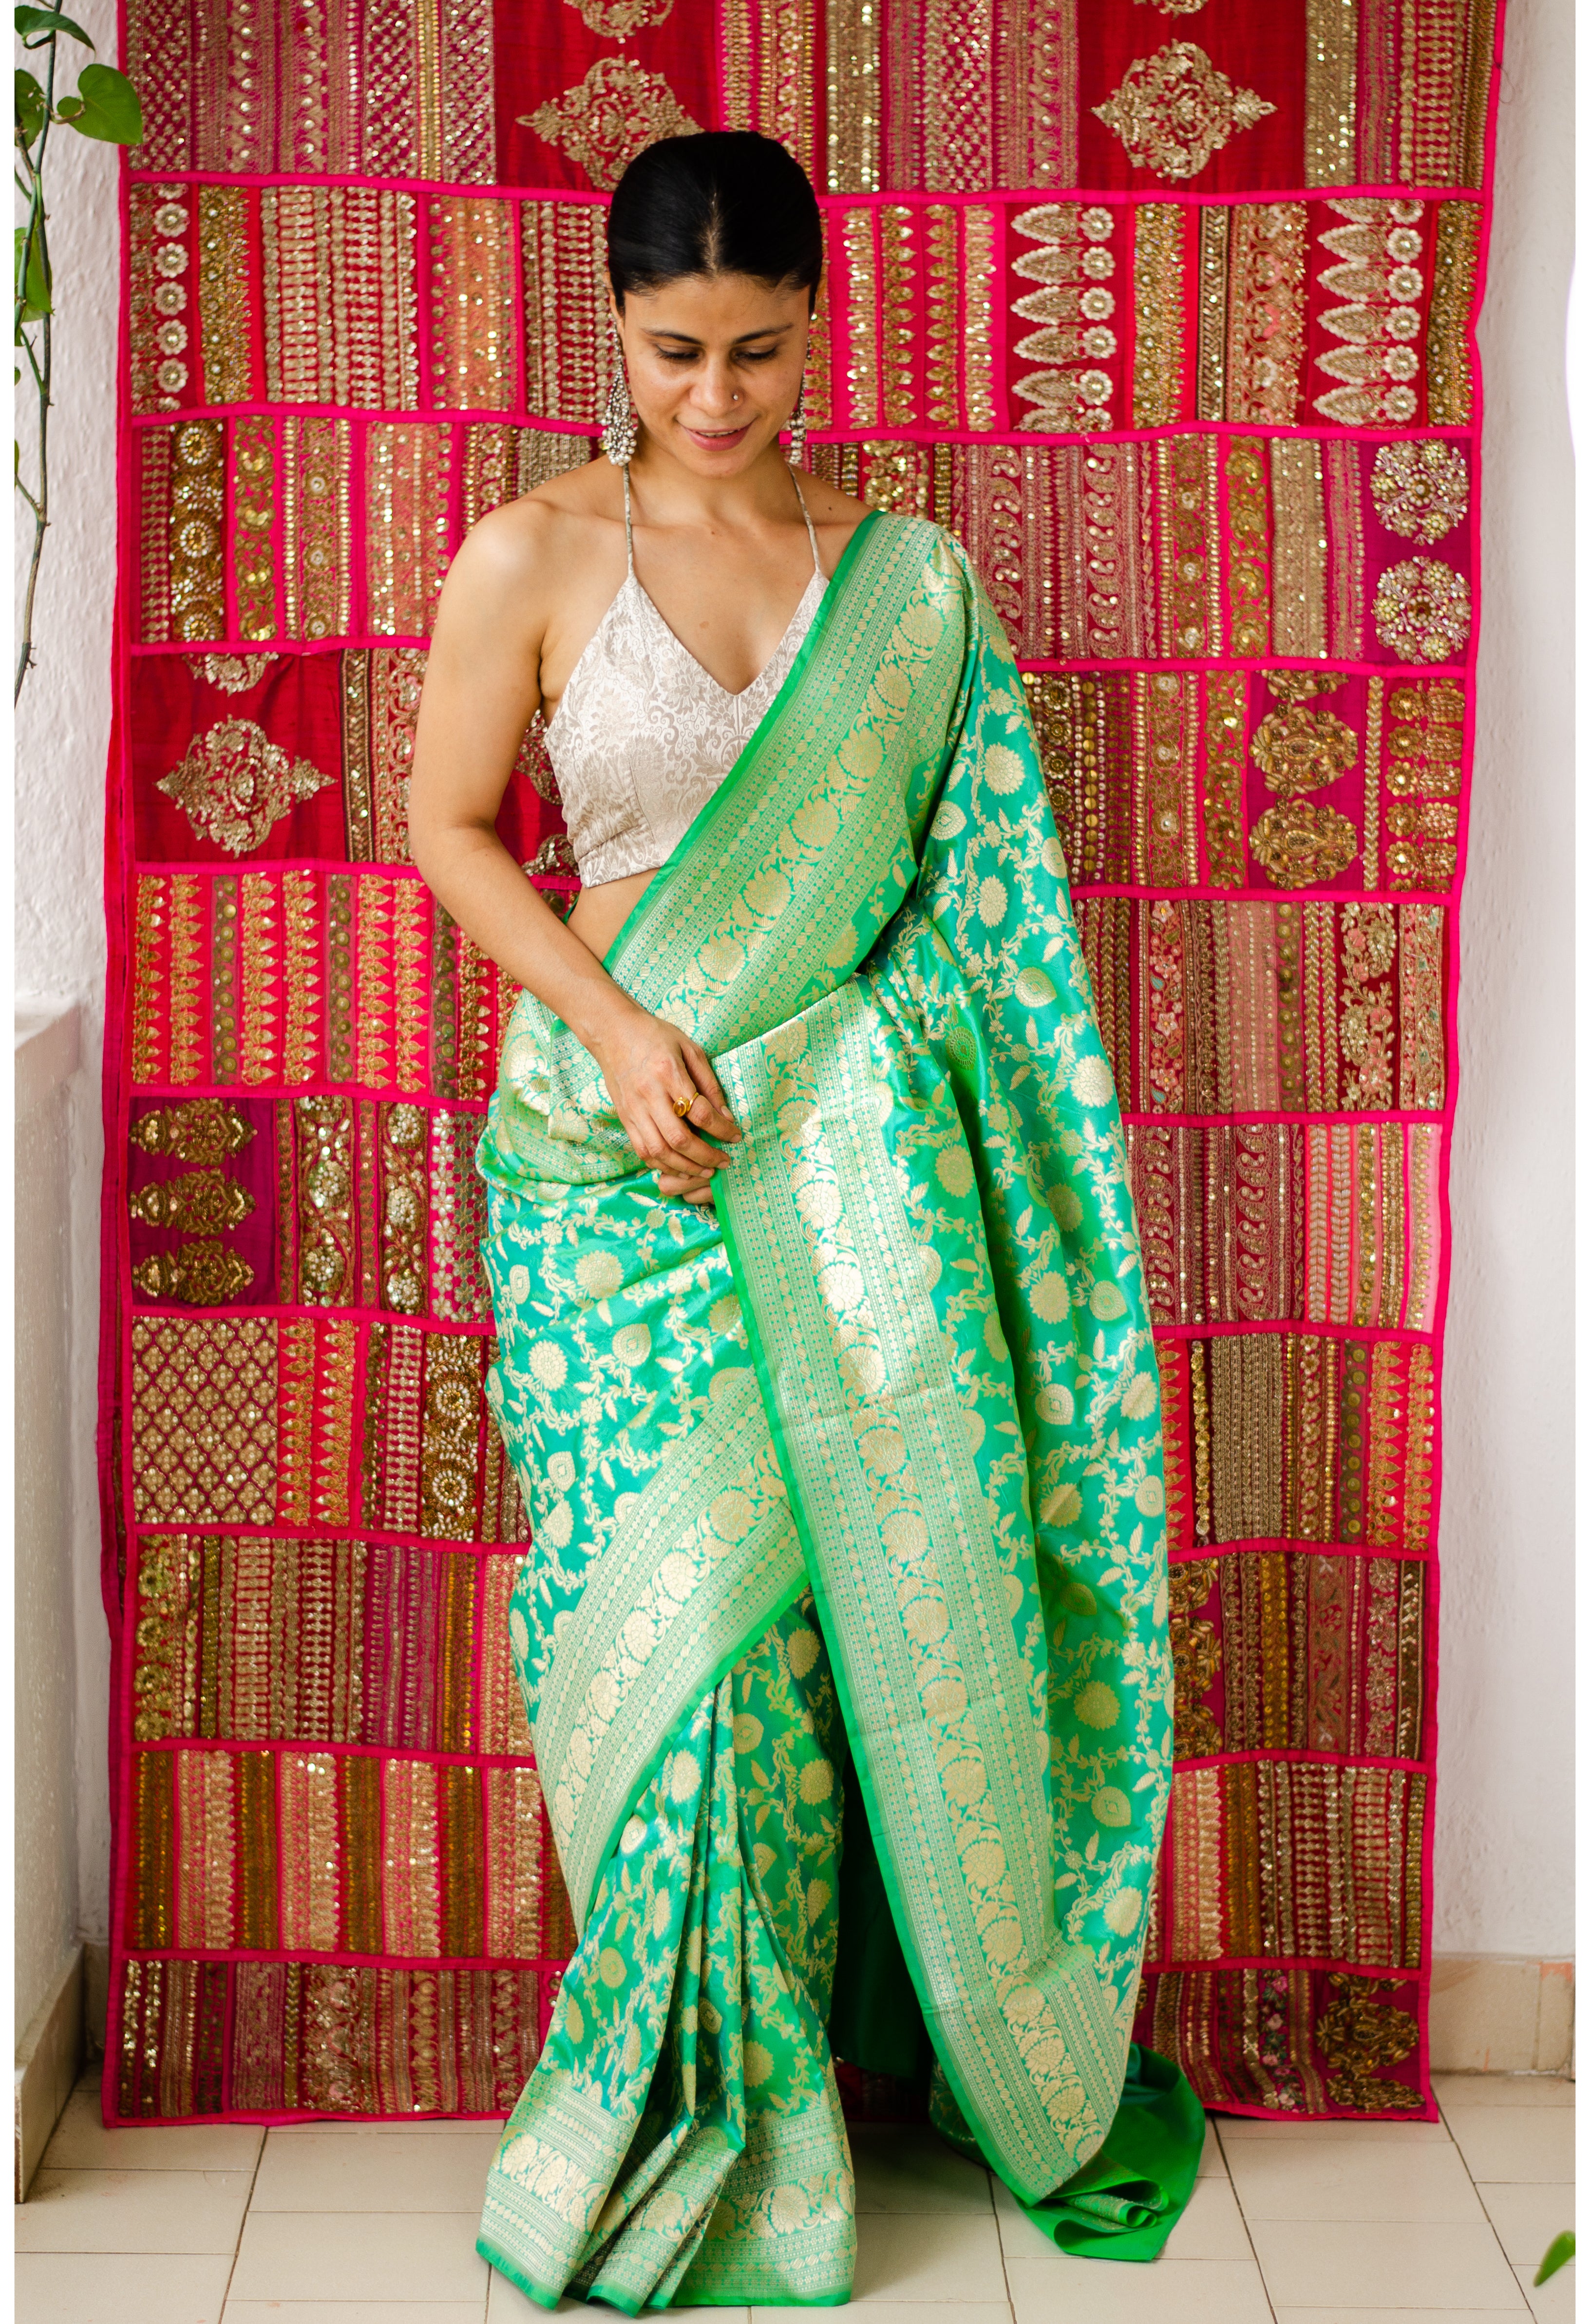 Parrot Green Color Banarasi Semi Georgette Silk Saree | Banarasi Saree |  Georgette Sarees | Semi Georgette Sarees Muted Gold Zari Weave | Silk saree  banarasi, Pure products, Color